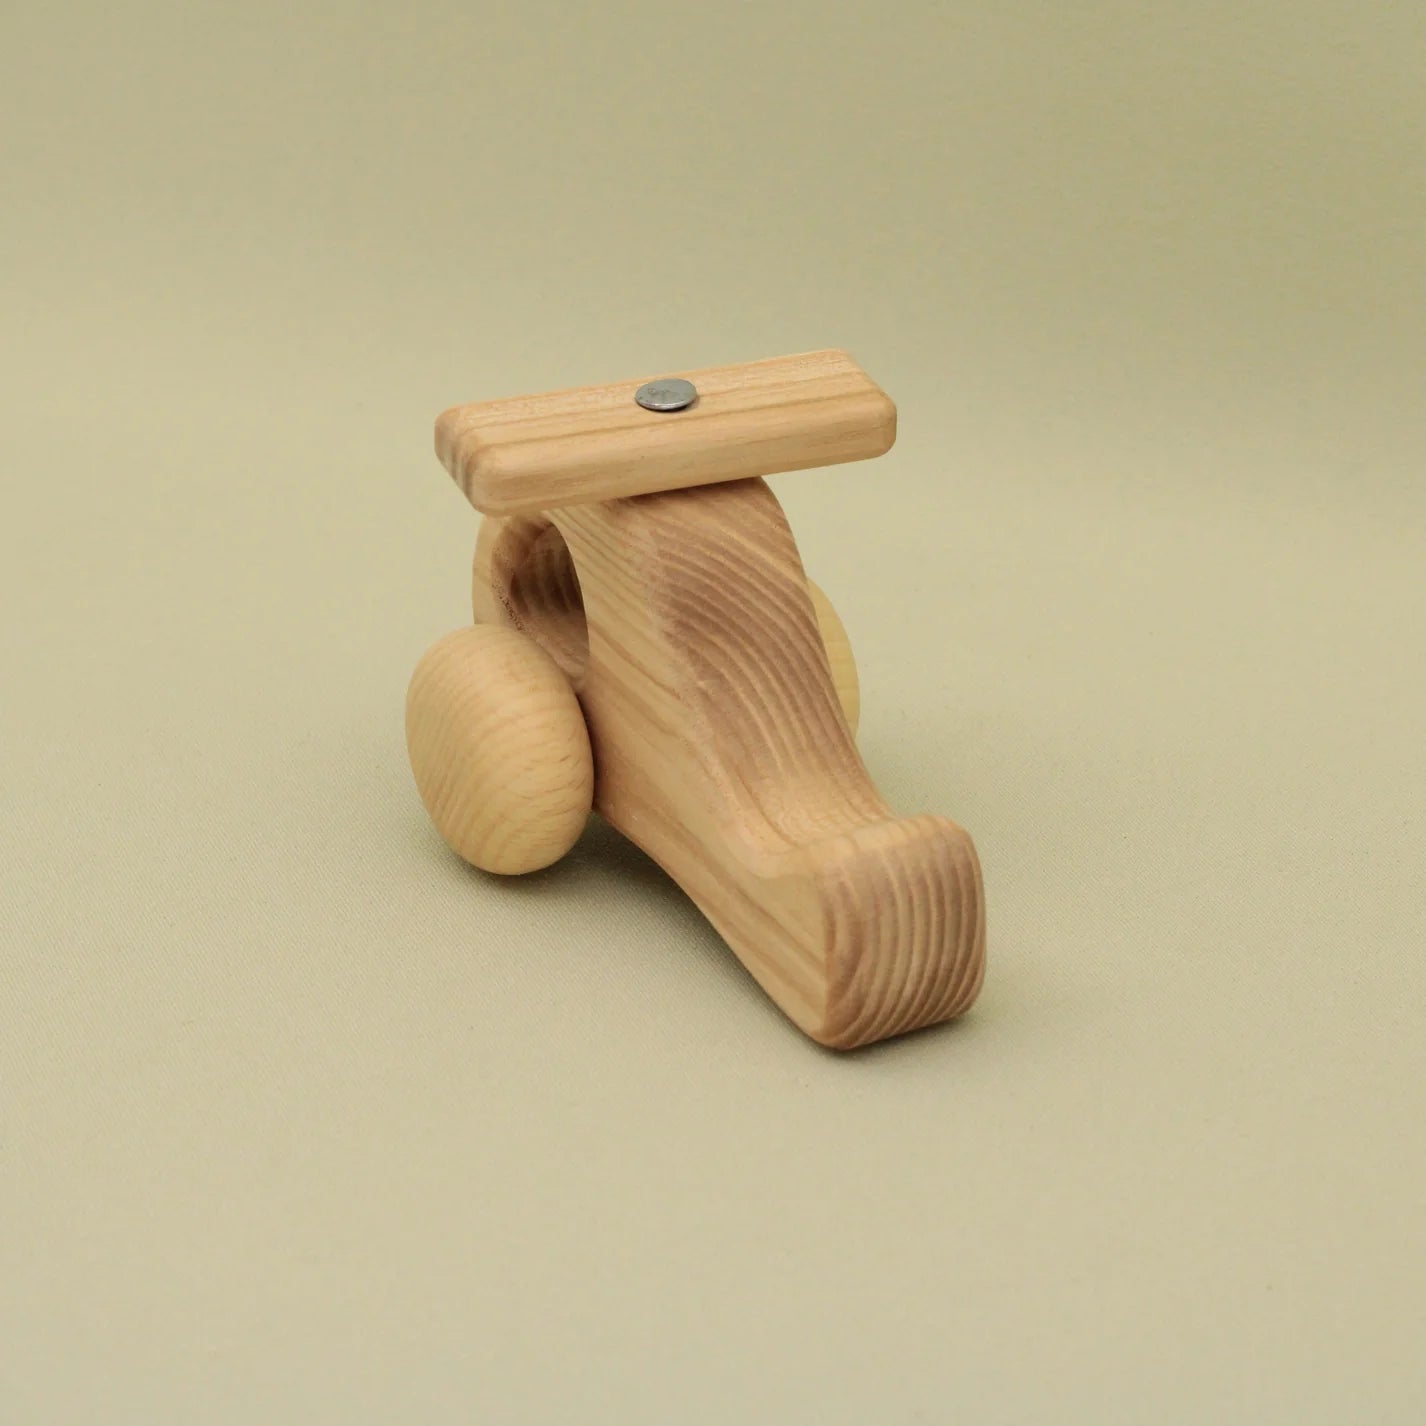 Mini Wooden Eco Friendly Natural Toy Helicopter